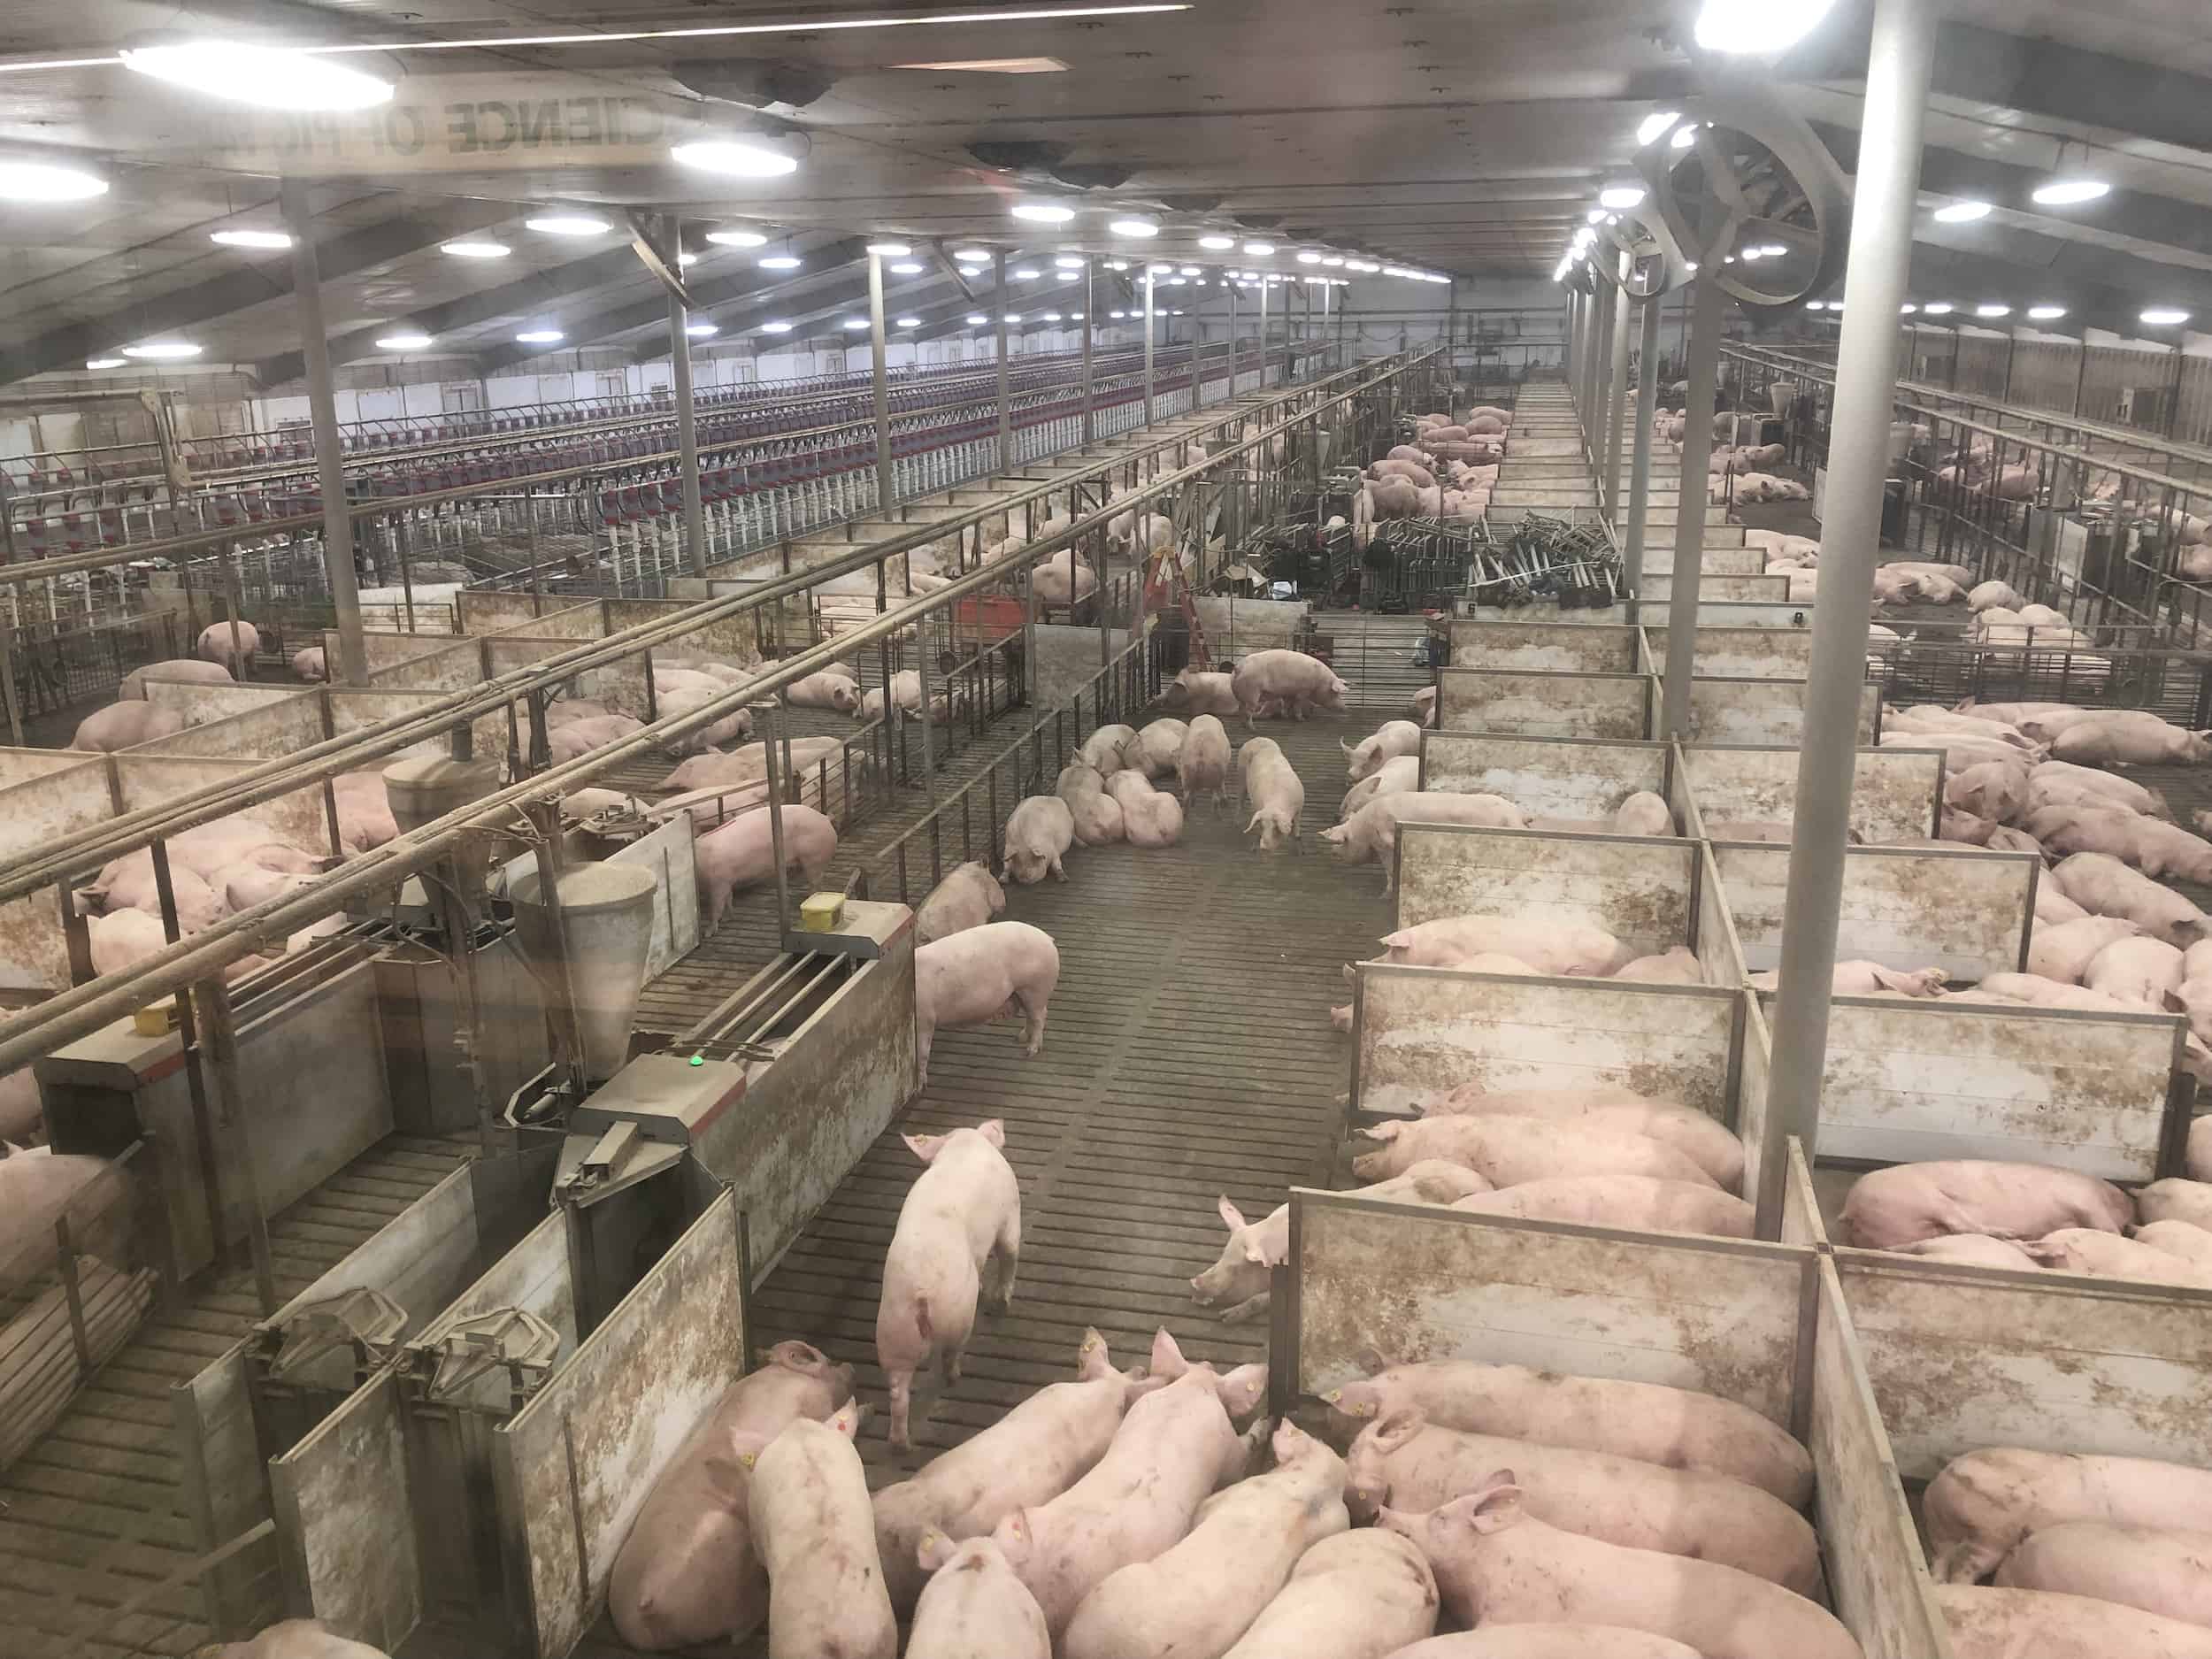 Gestation and breeding area on the Pig Adventure at Fair Oaks Farms in Indiana